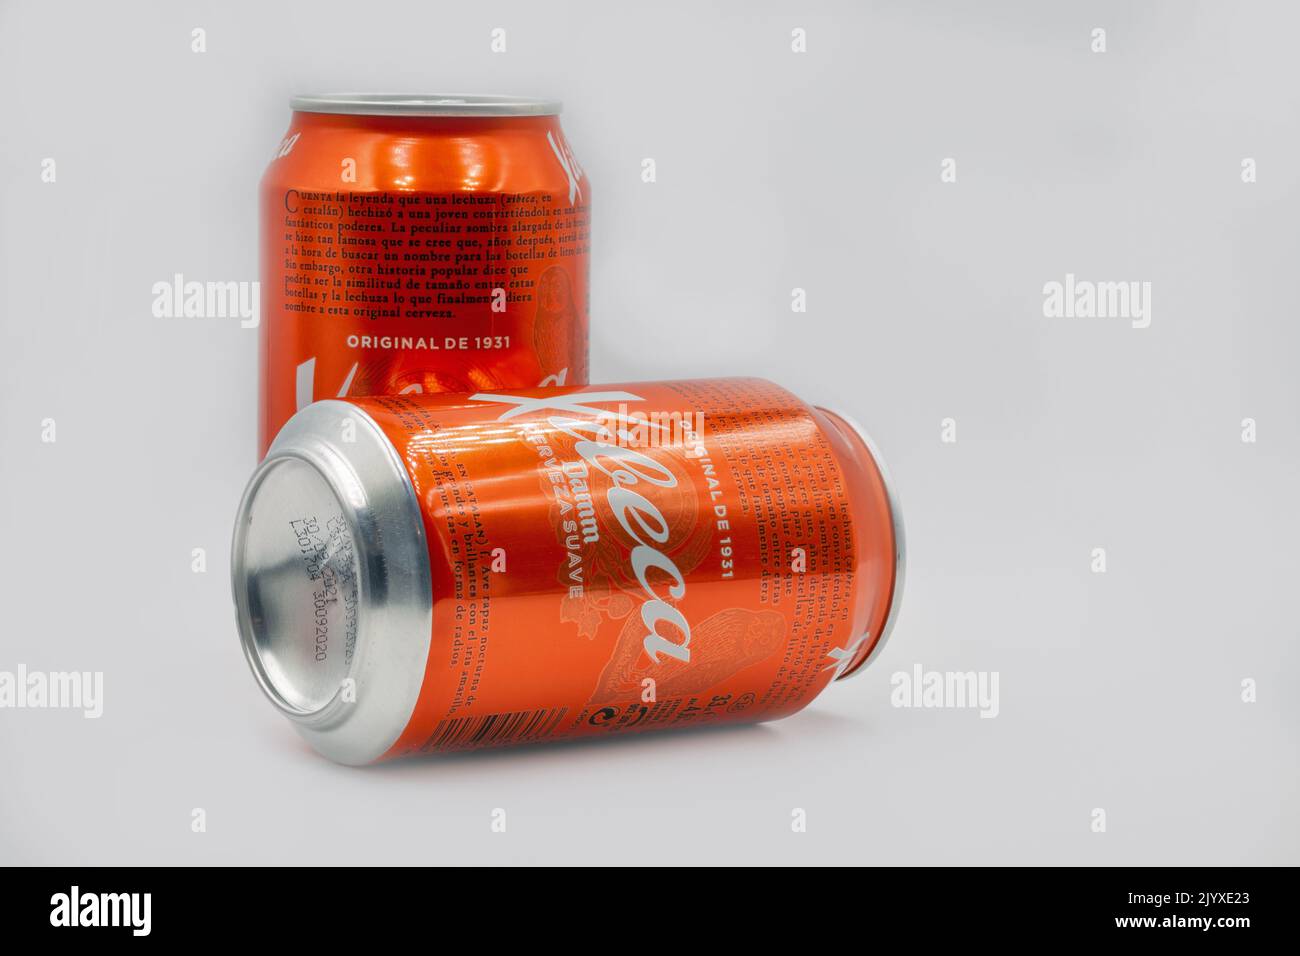 Kyiv, Ukraine - June 10, 2021: Studio shoot of Spanish beer Xibeca cans from manufacturer Barcelona brewery S.A. Damm closeup on white. It produced an Stock Photo